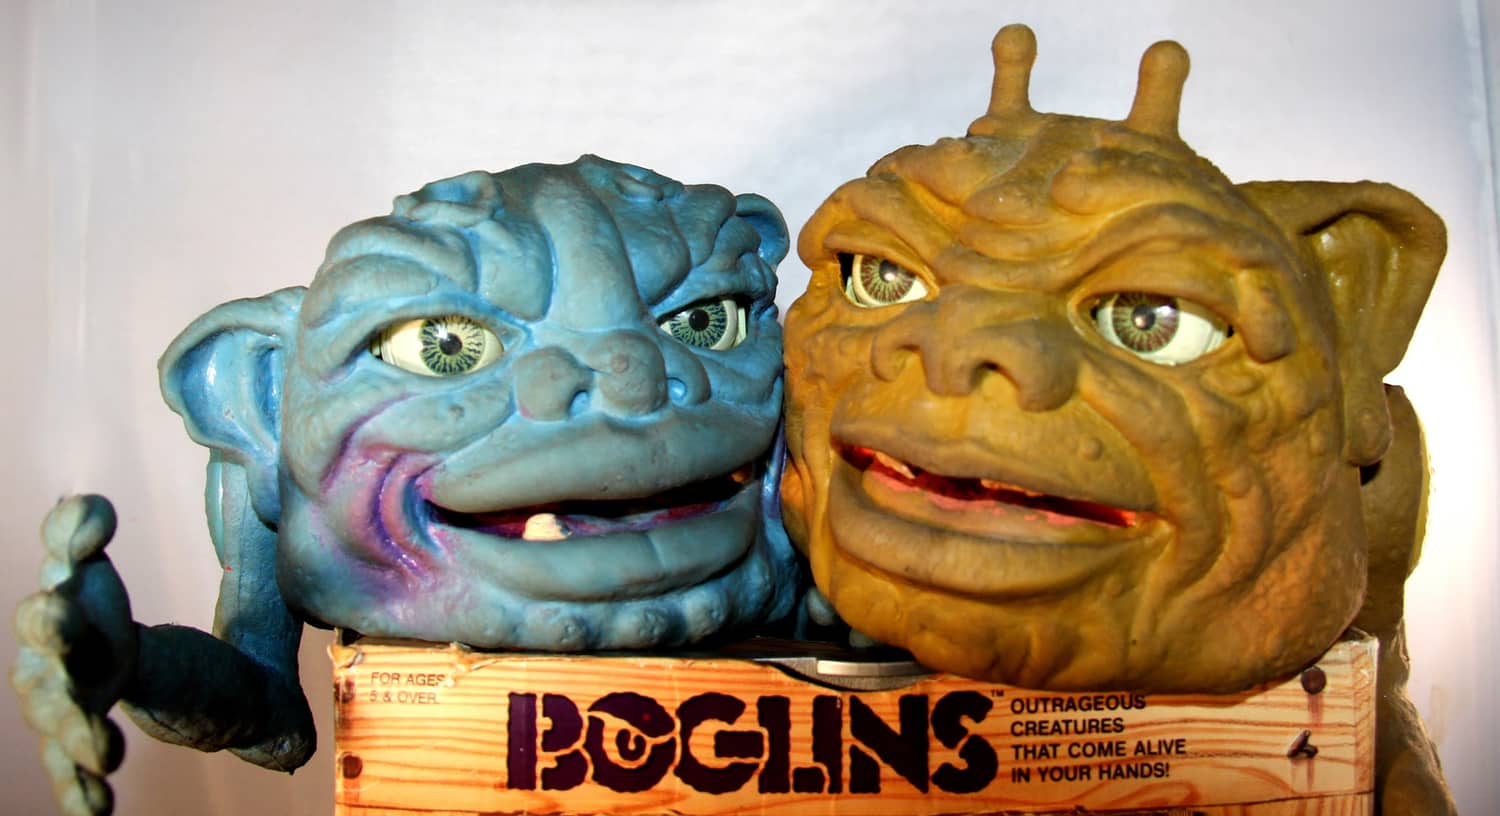 Boglins,From popular movies like Ghoulies, Gremlins and Critters, the Boglins line were a series of toys distributed by Mattel.